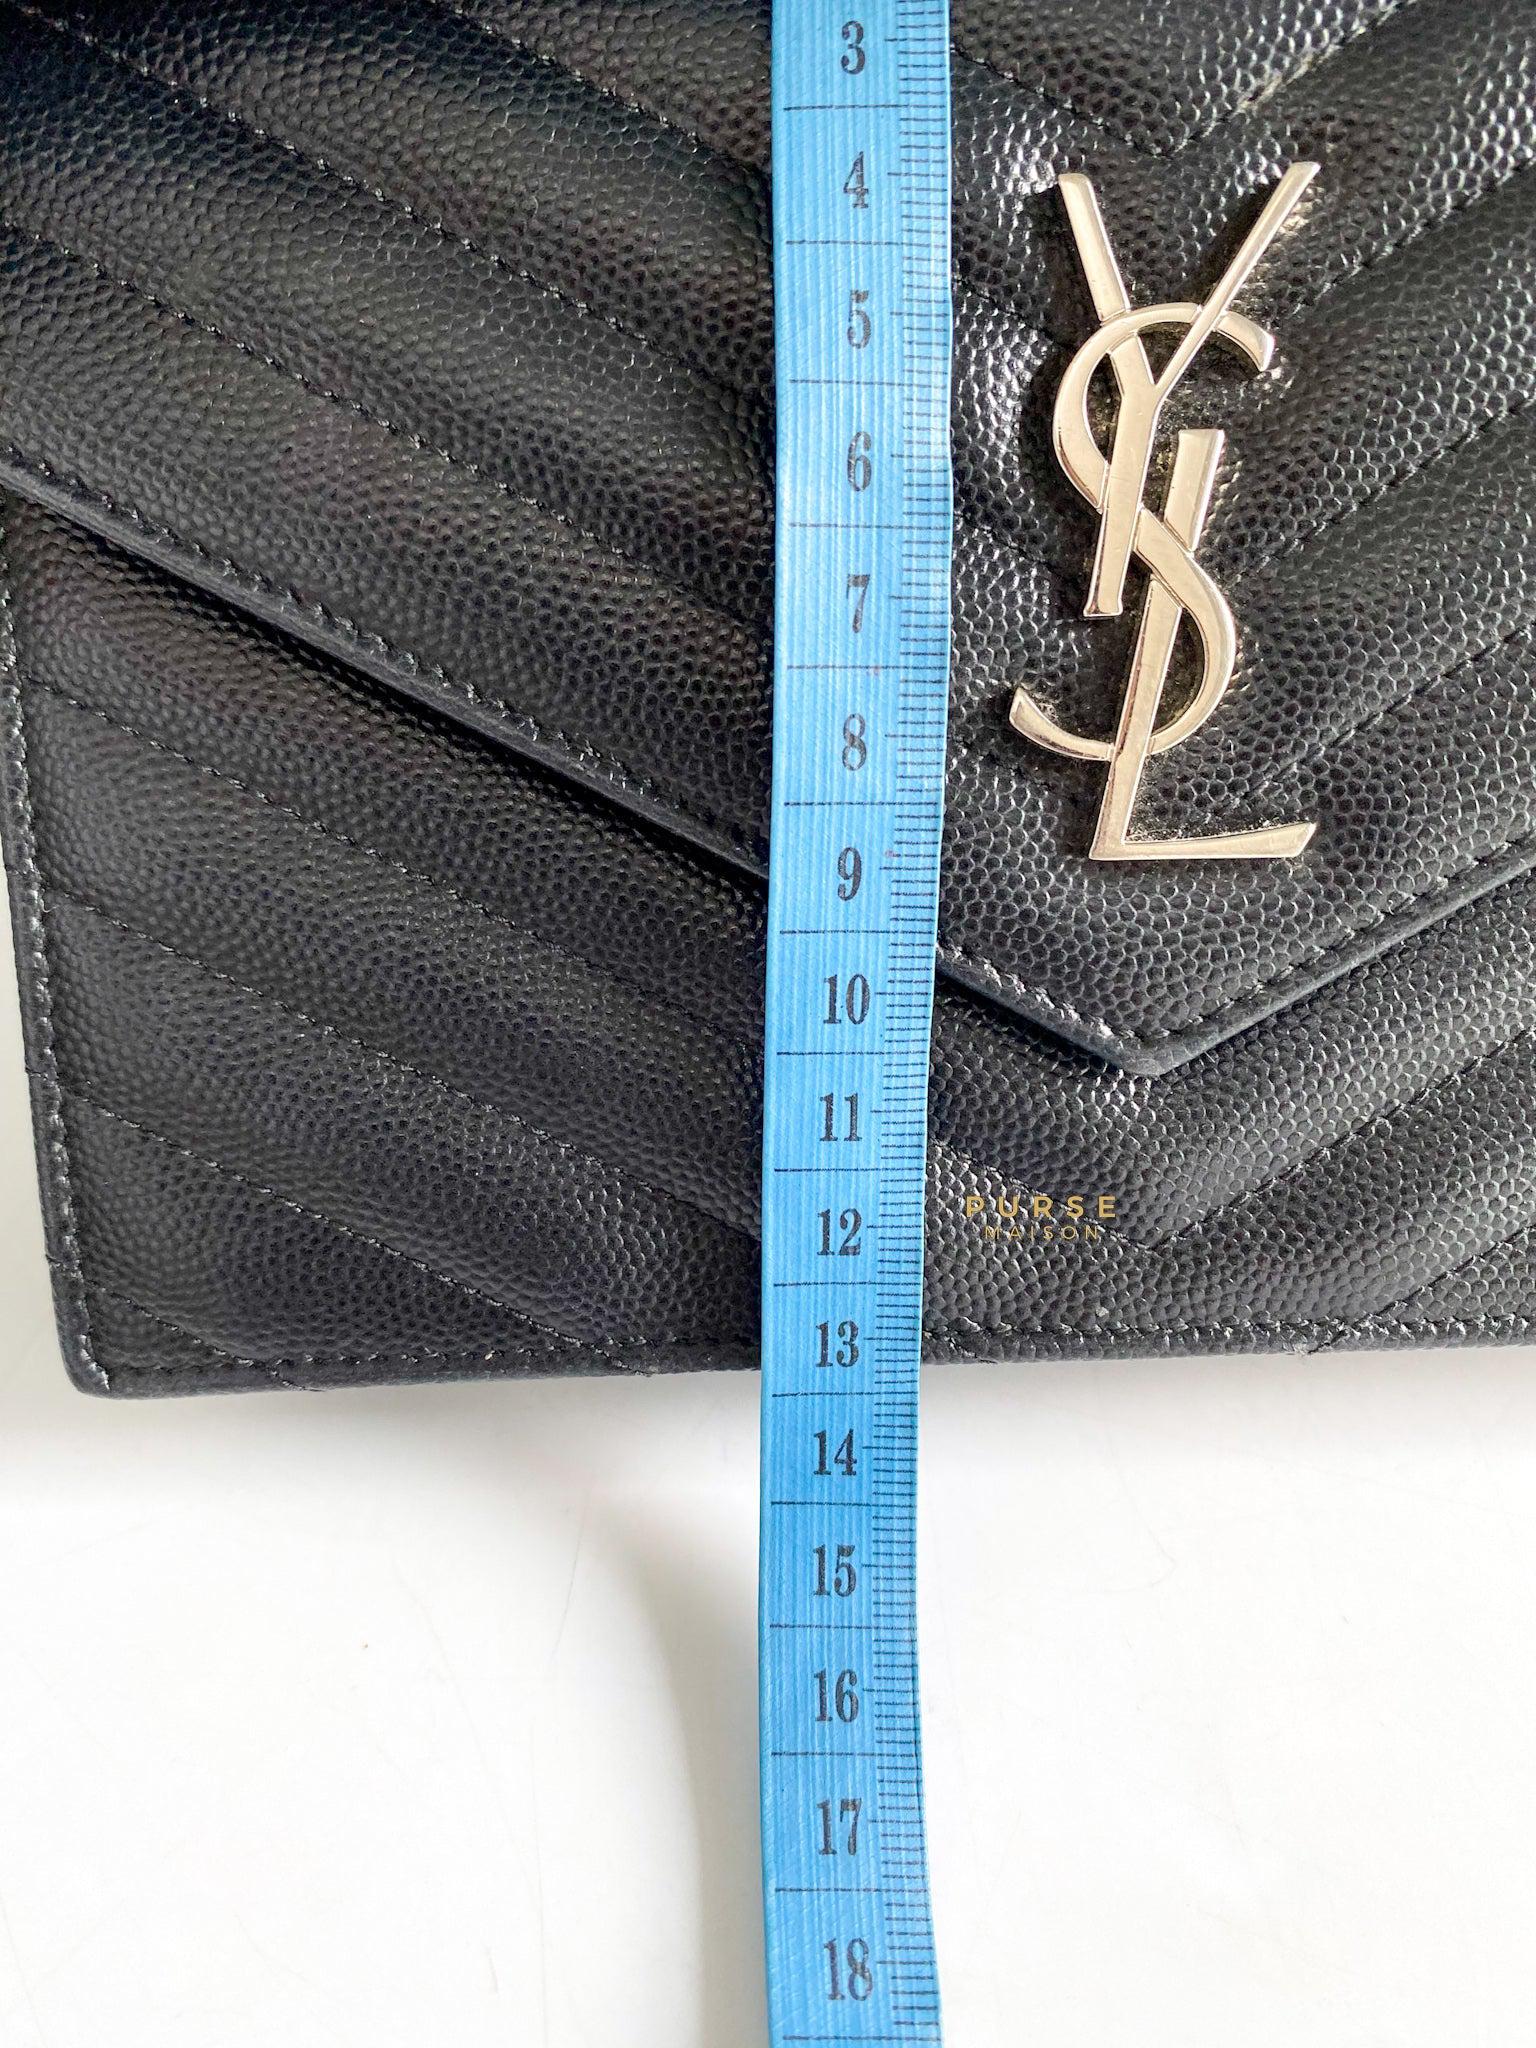 YSL Wallet on Chain Small in Monogram Grain Black Leather and Silver Hardware